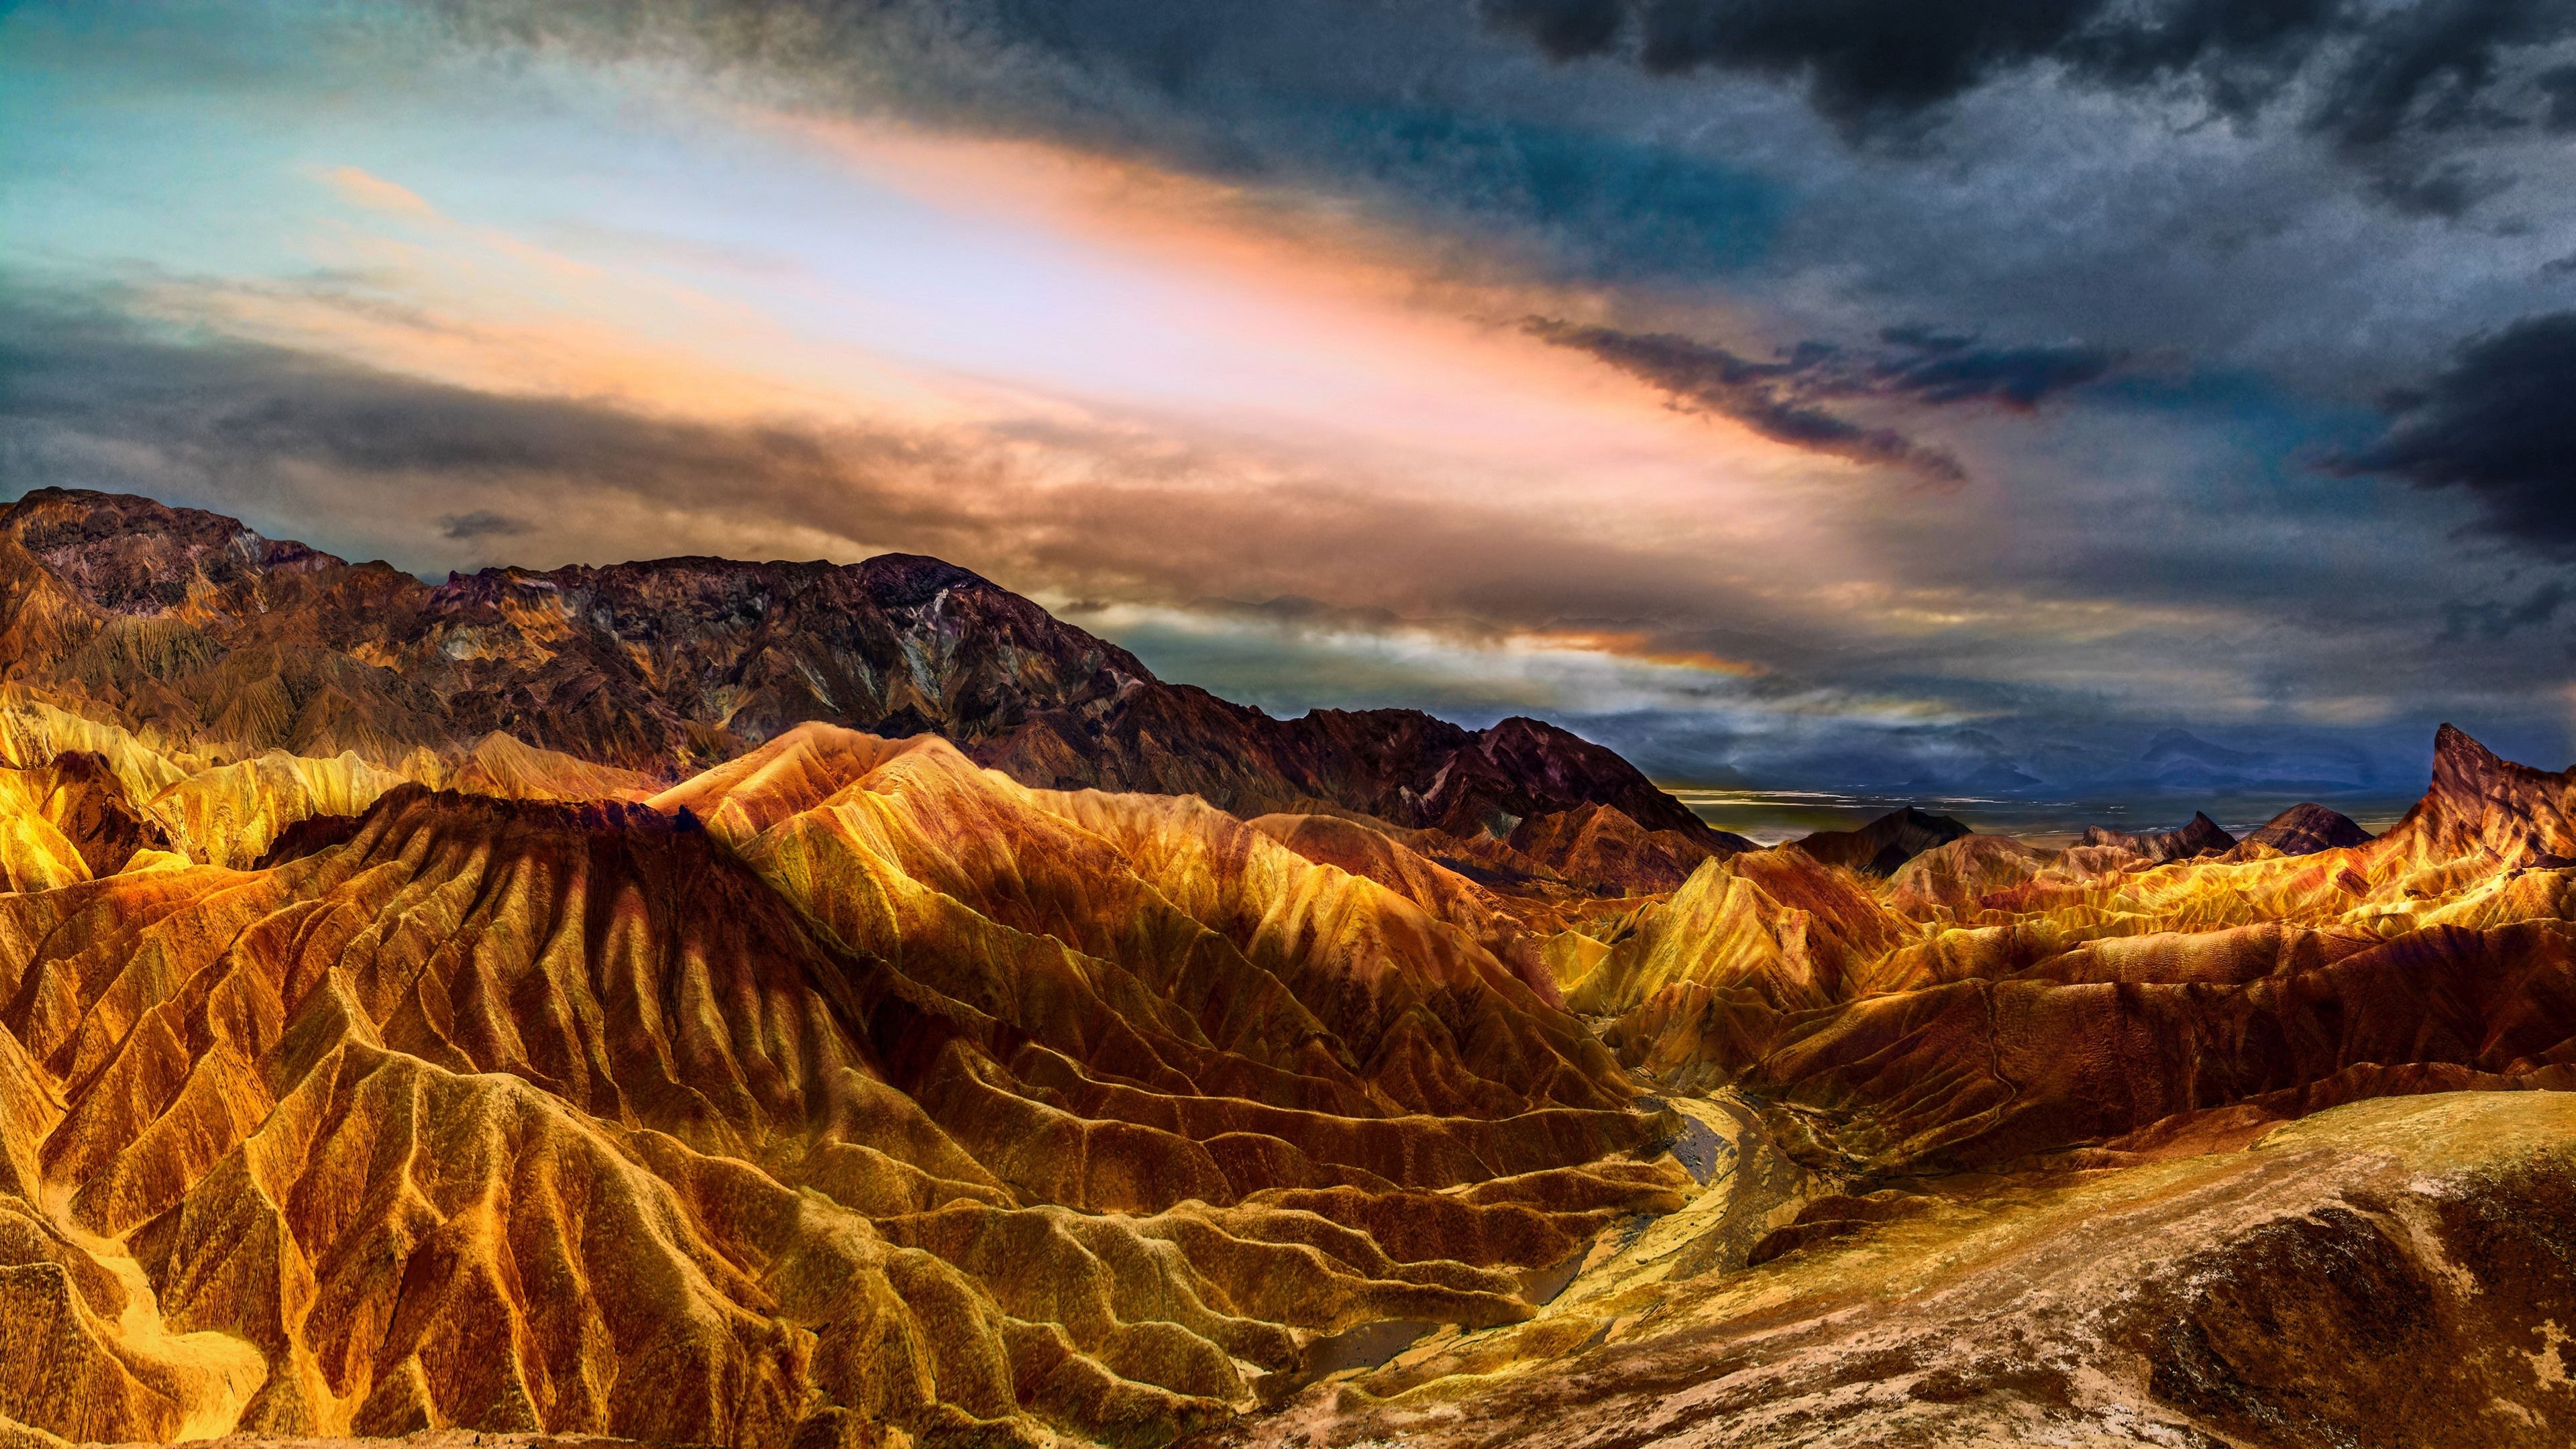 Wallpaper USA, Death Valley, mountains, clouds, nature landscape 3840x2160 UHD 4K Picture, Image